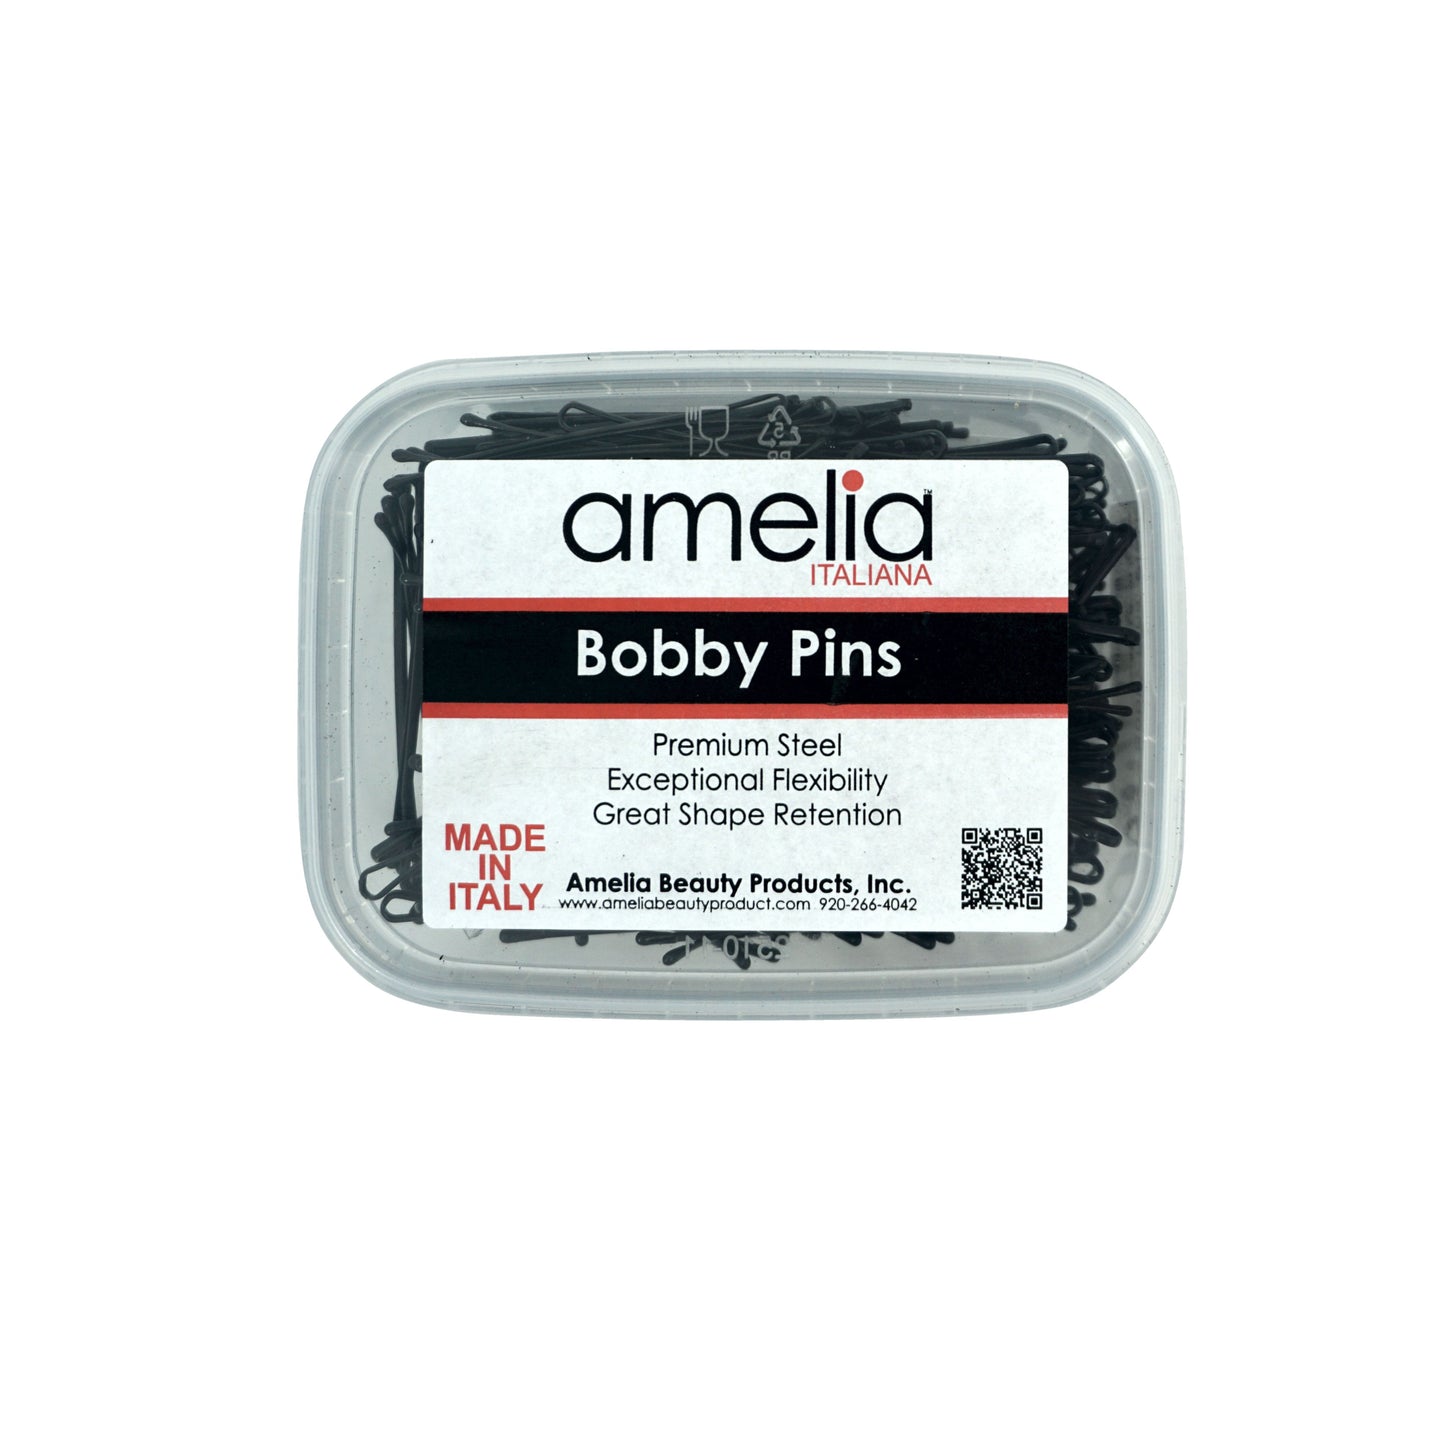 280, Black, 2.4in (6.0cm), Italian Made Flat Bobby Pins, Recloseable Stay Clean and Organized Container